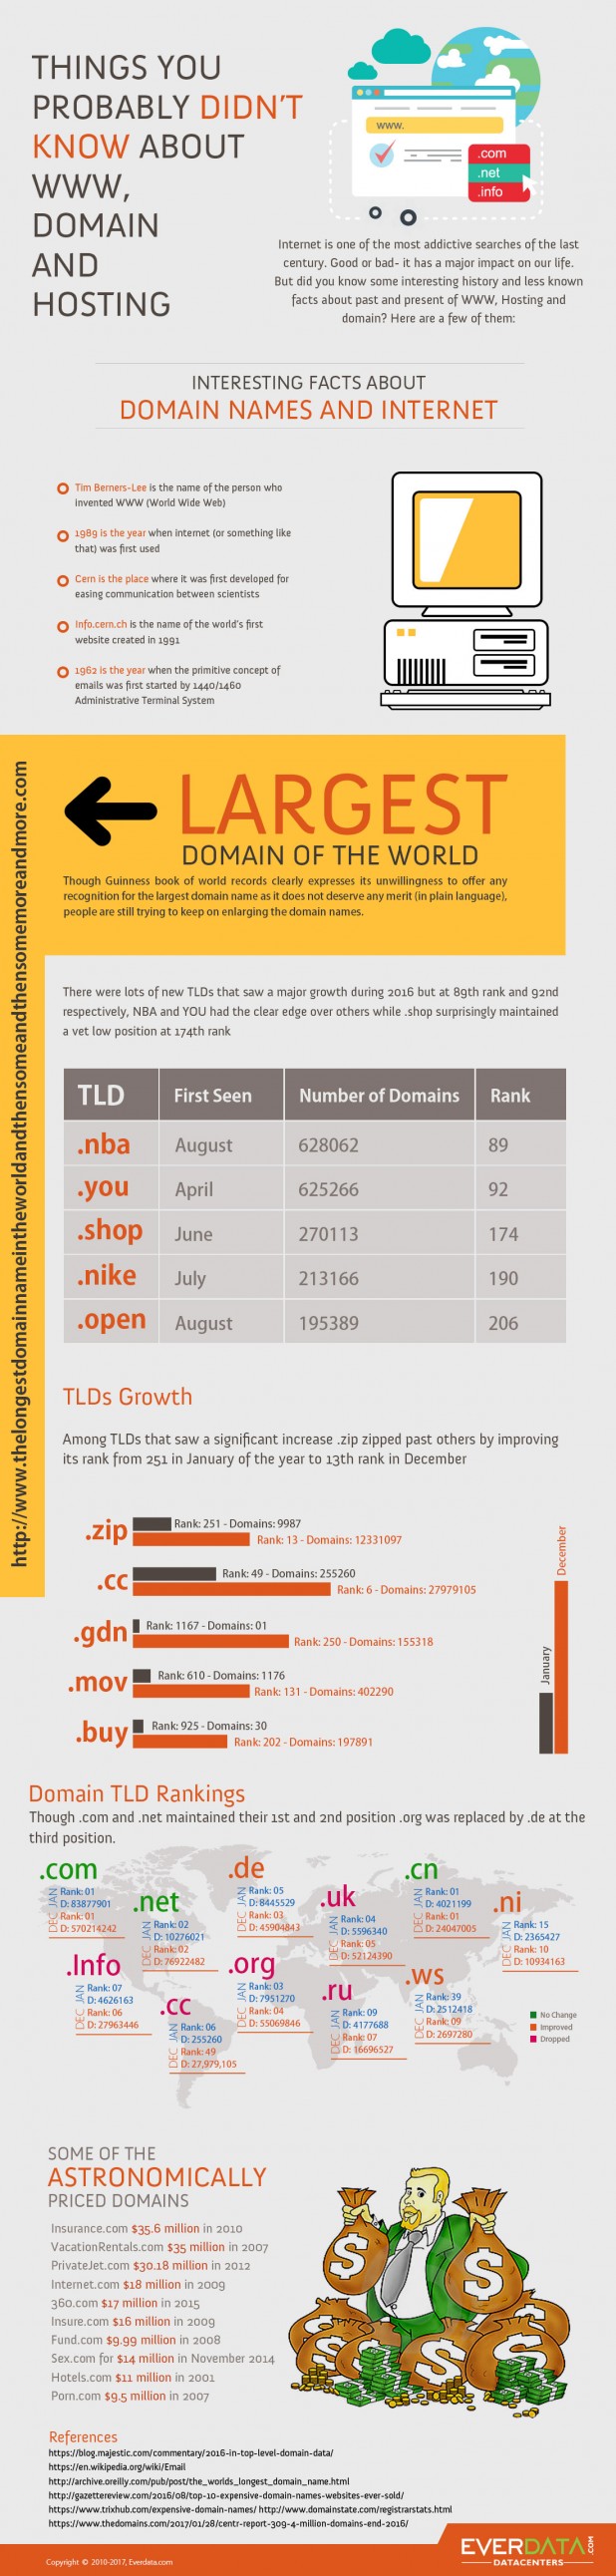 Infographic - Things you probably didn_ t know about WWW, domain and hosting